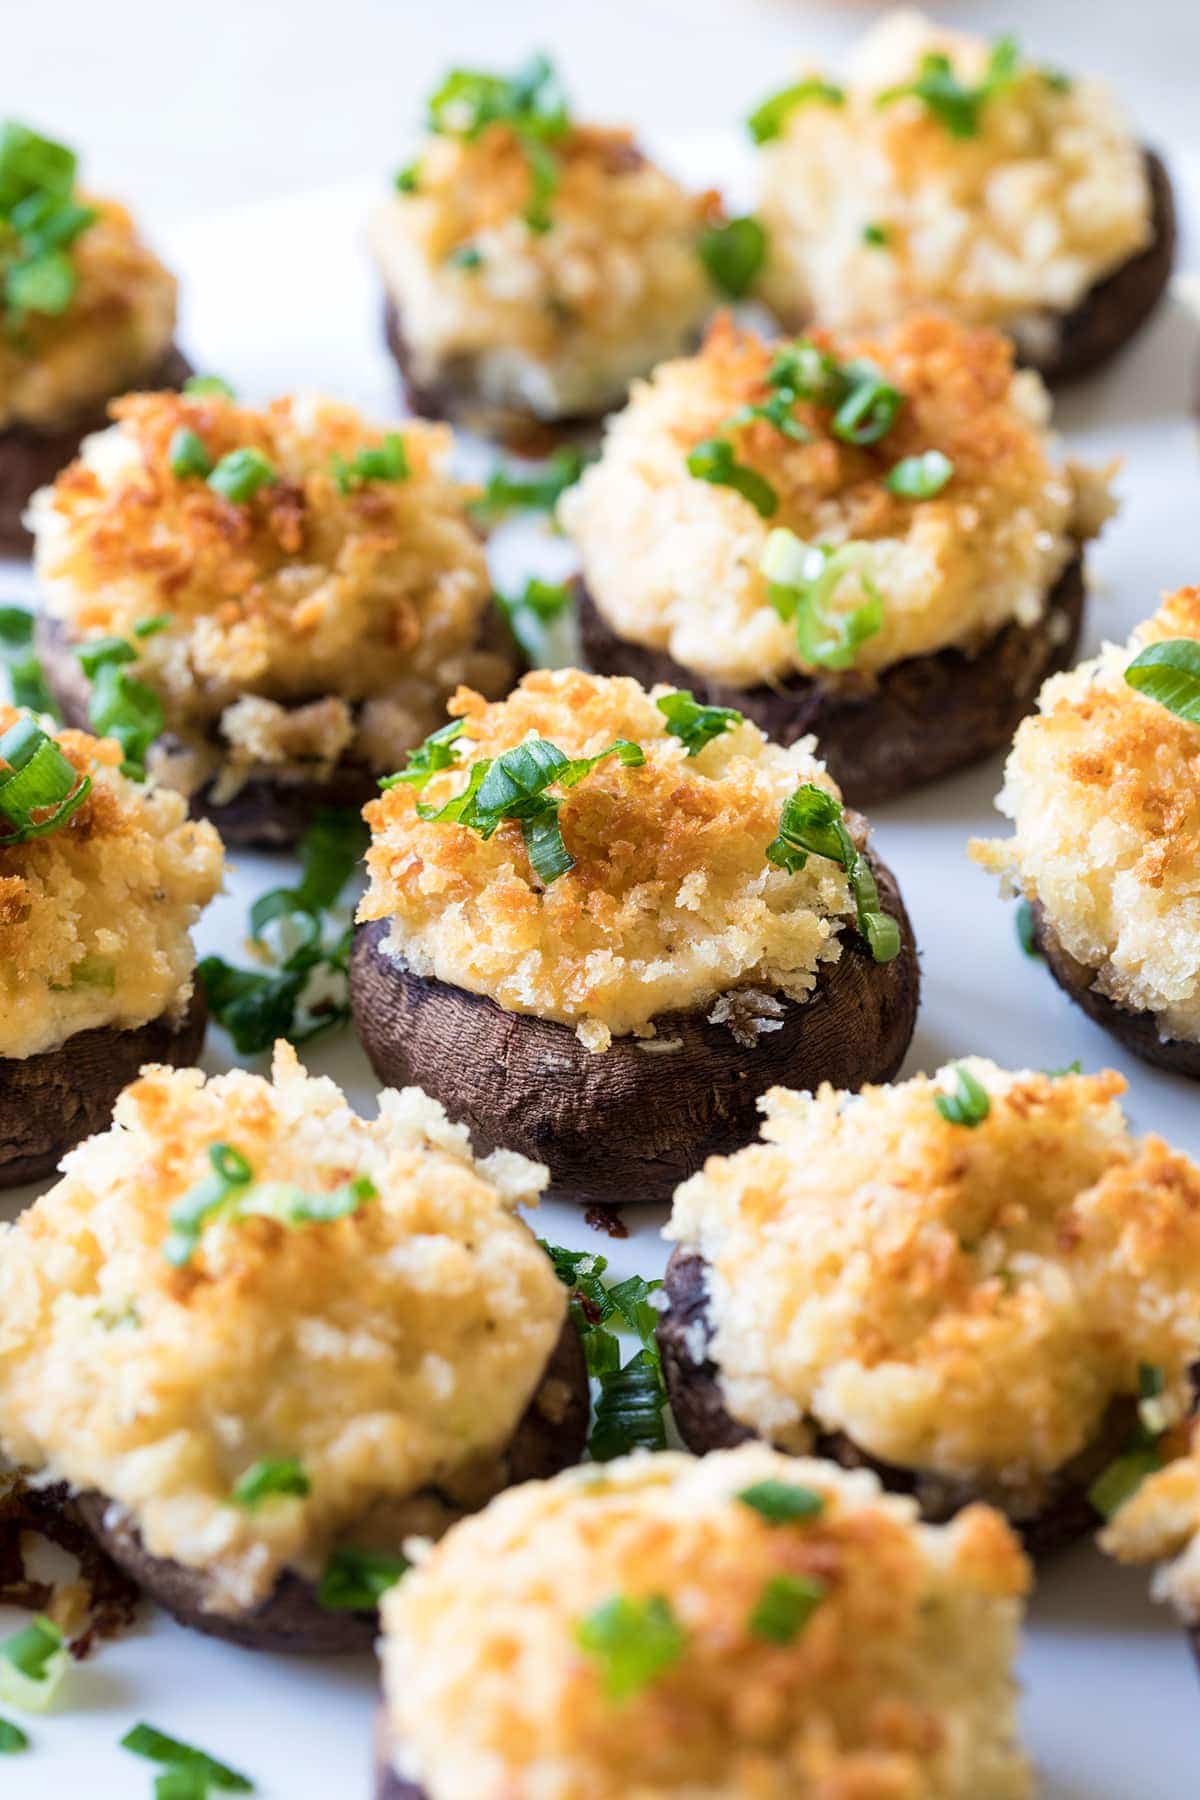 How To Make Baked Stuffed Mushrooms With Crab